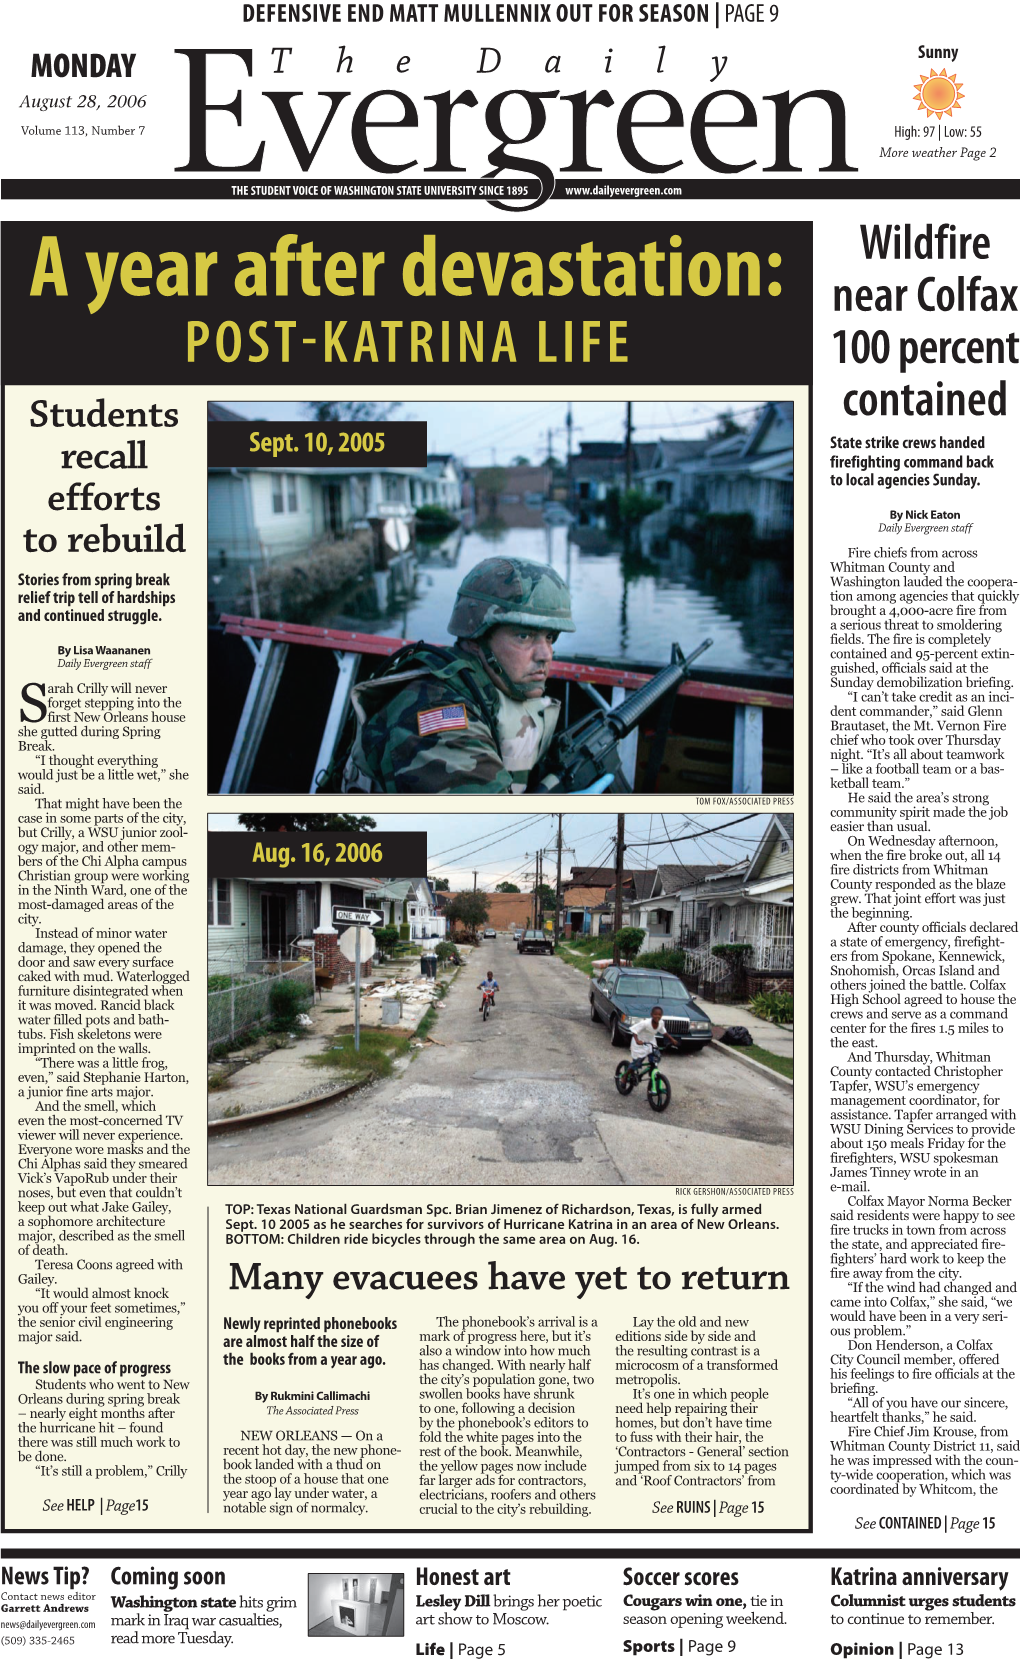 A Year After Devastation: Near Colfax POSTKATRINA LIFE 100 Percent Students Contained Sept